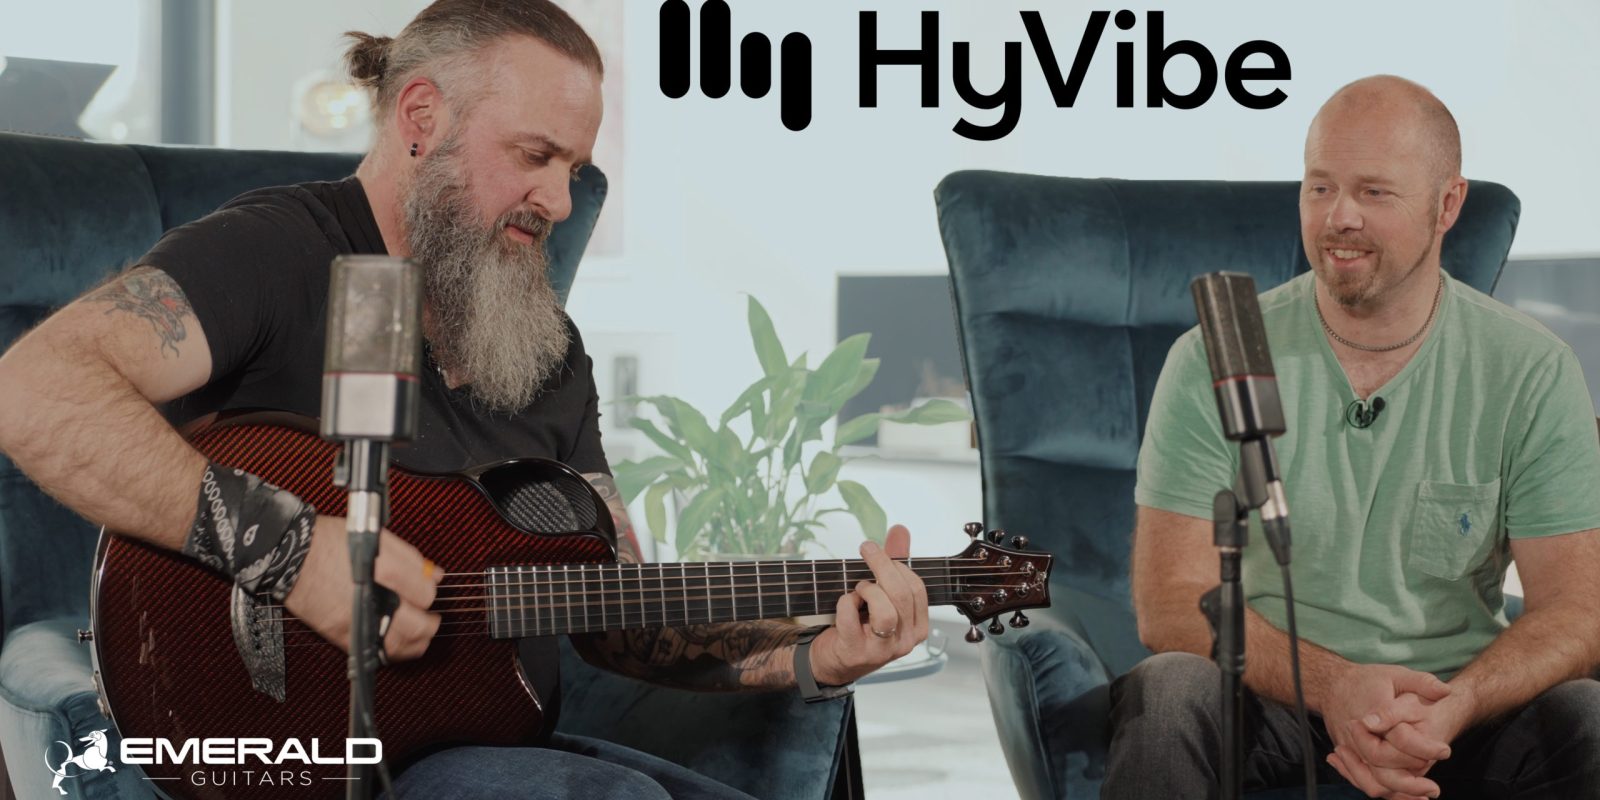 Musicians discussing Emerald's HyVibe System on guitar